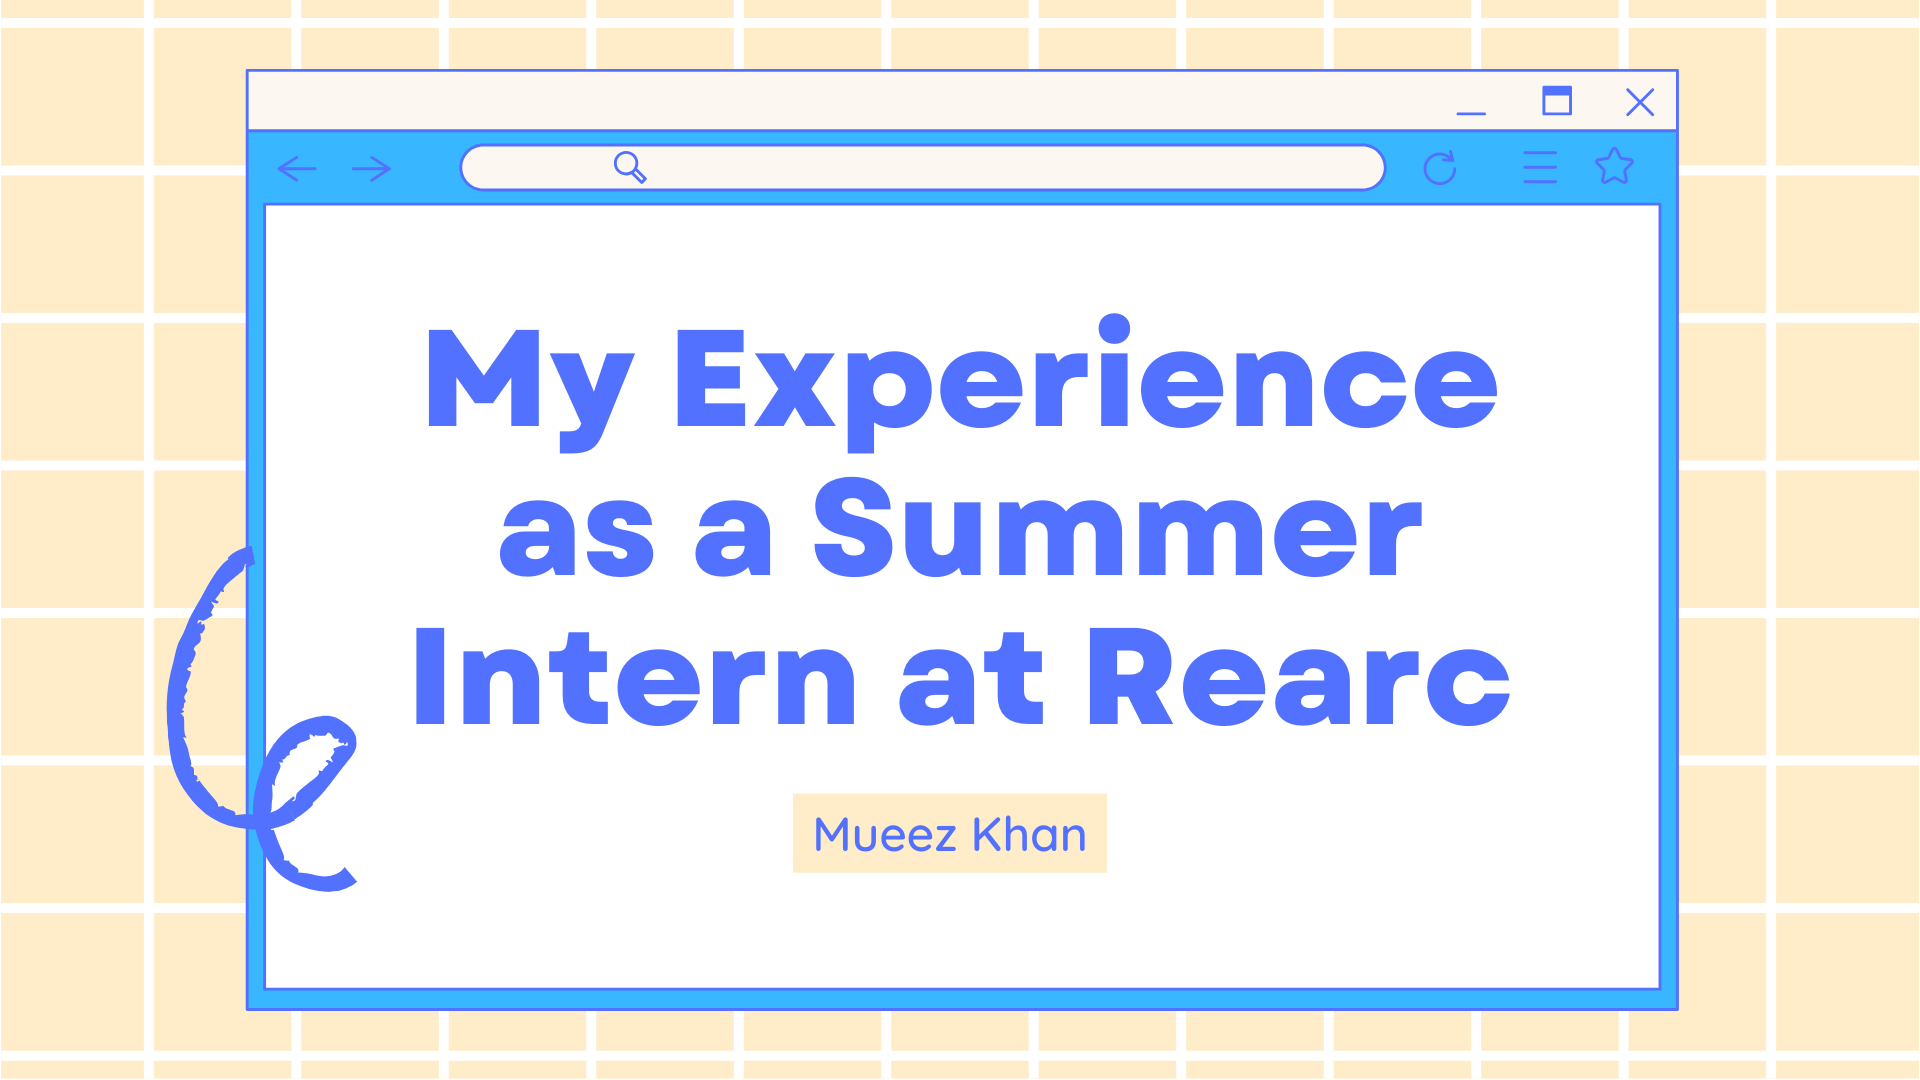 My Experience as a Summer Intern at Rearc